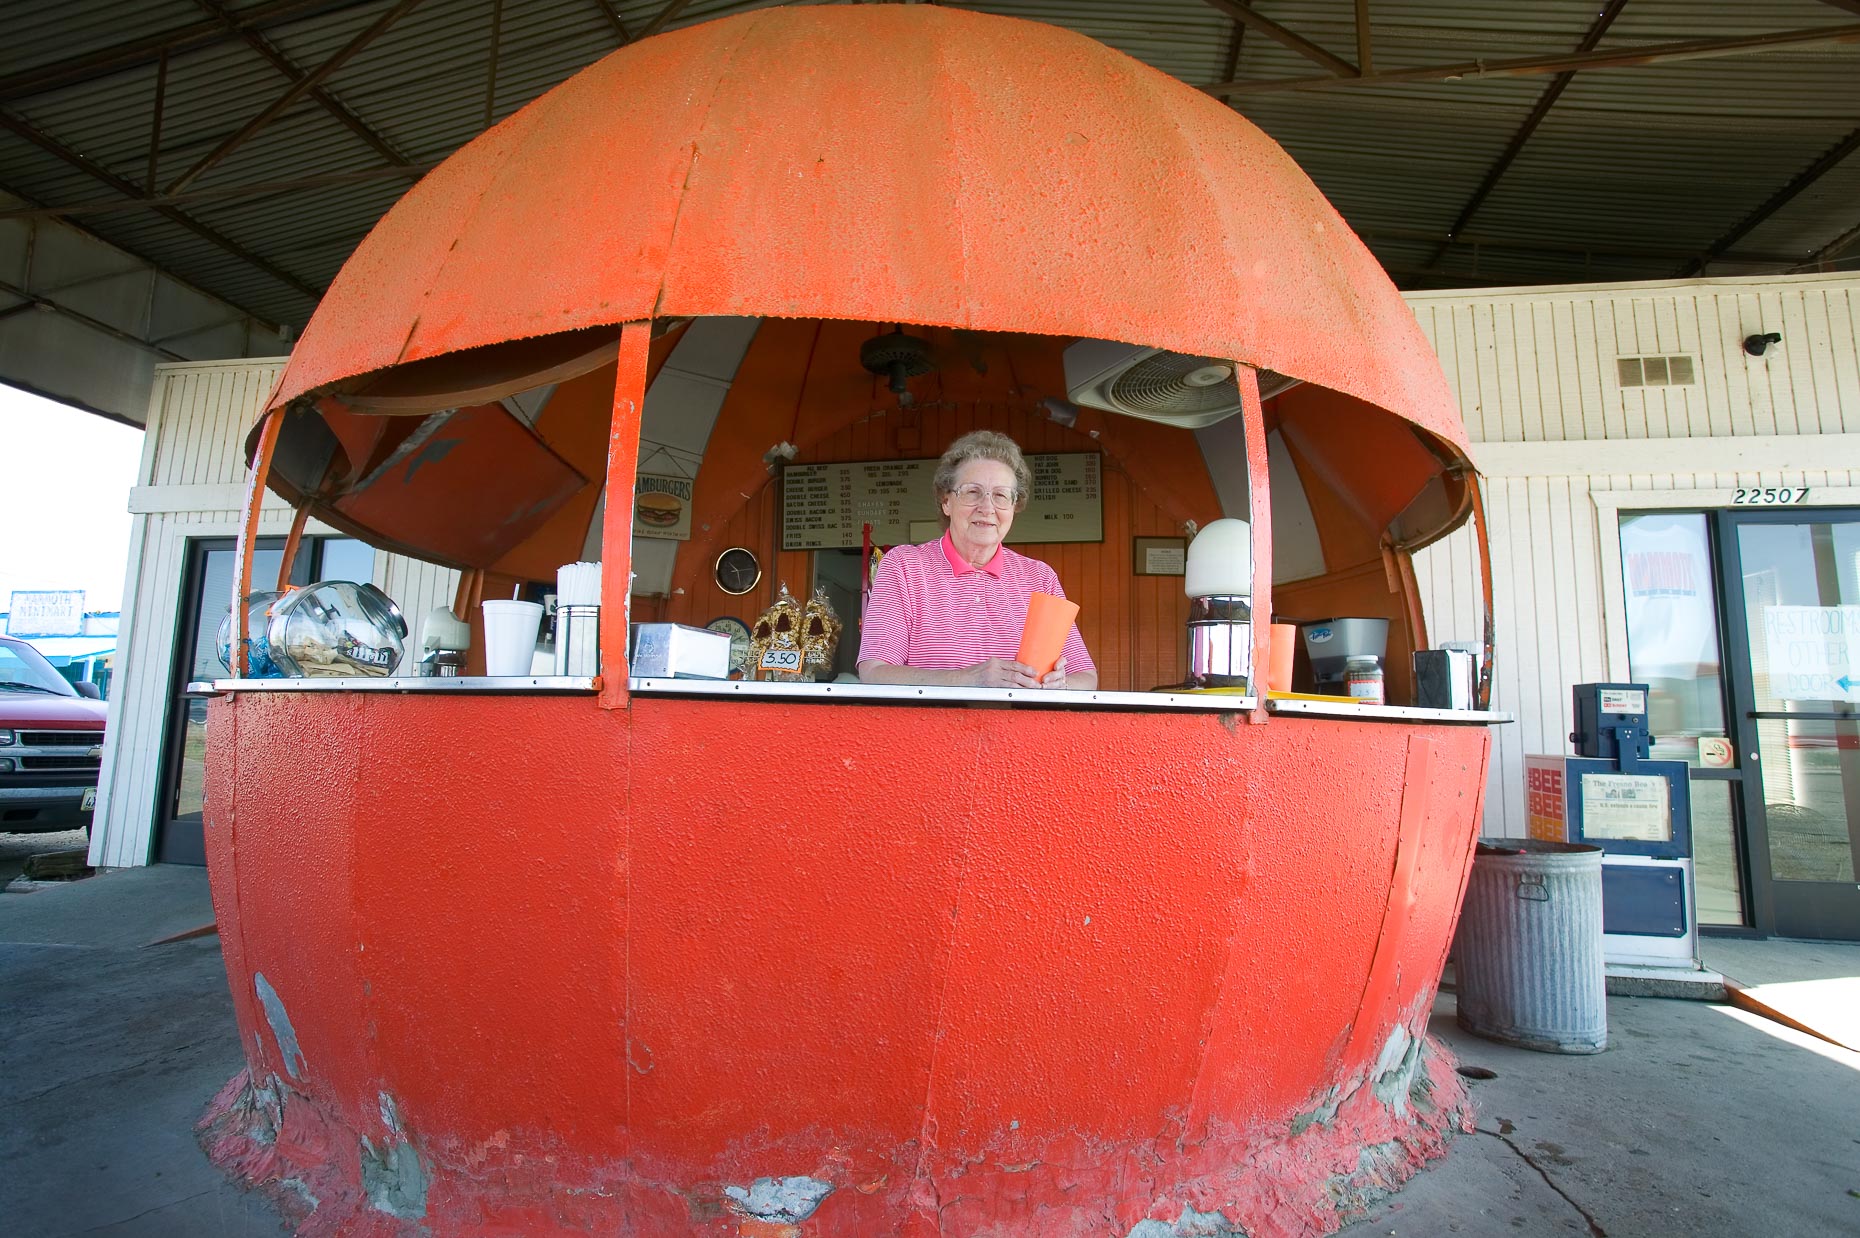 Portrait of woman standing in orange shaped roadside juice stand in Madera, California by David Zaitz